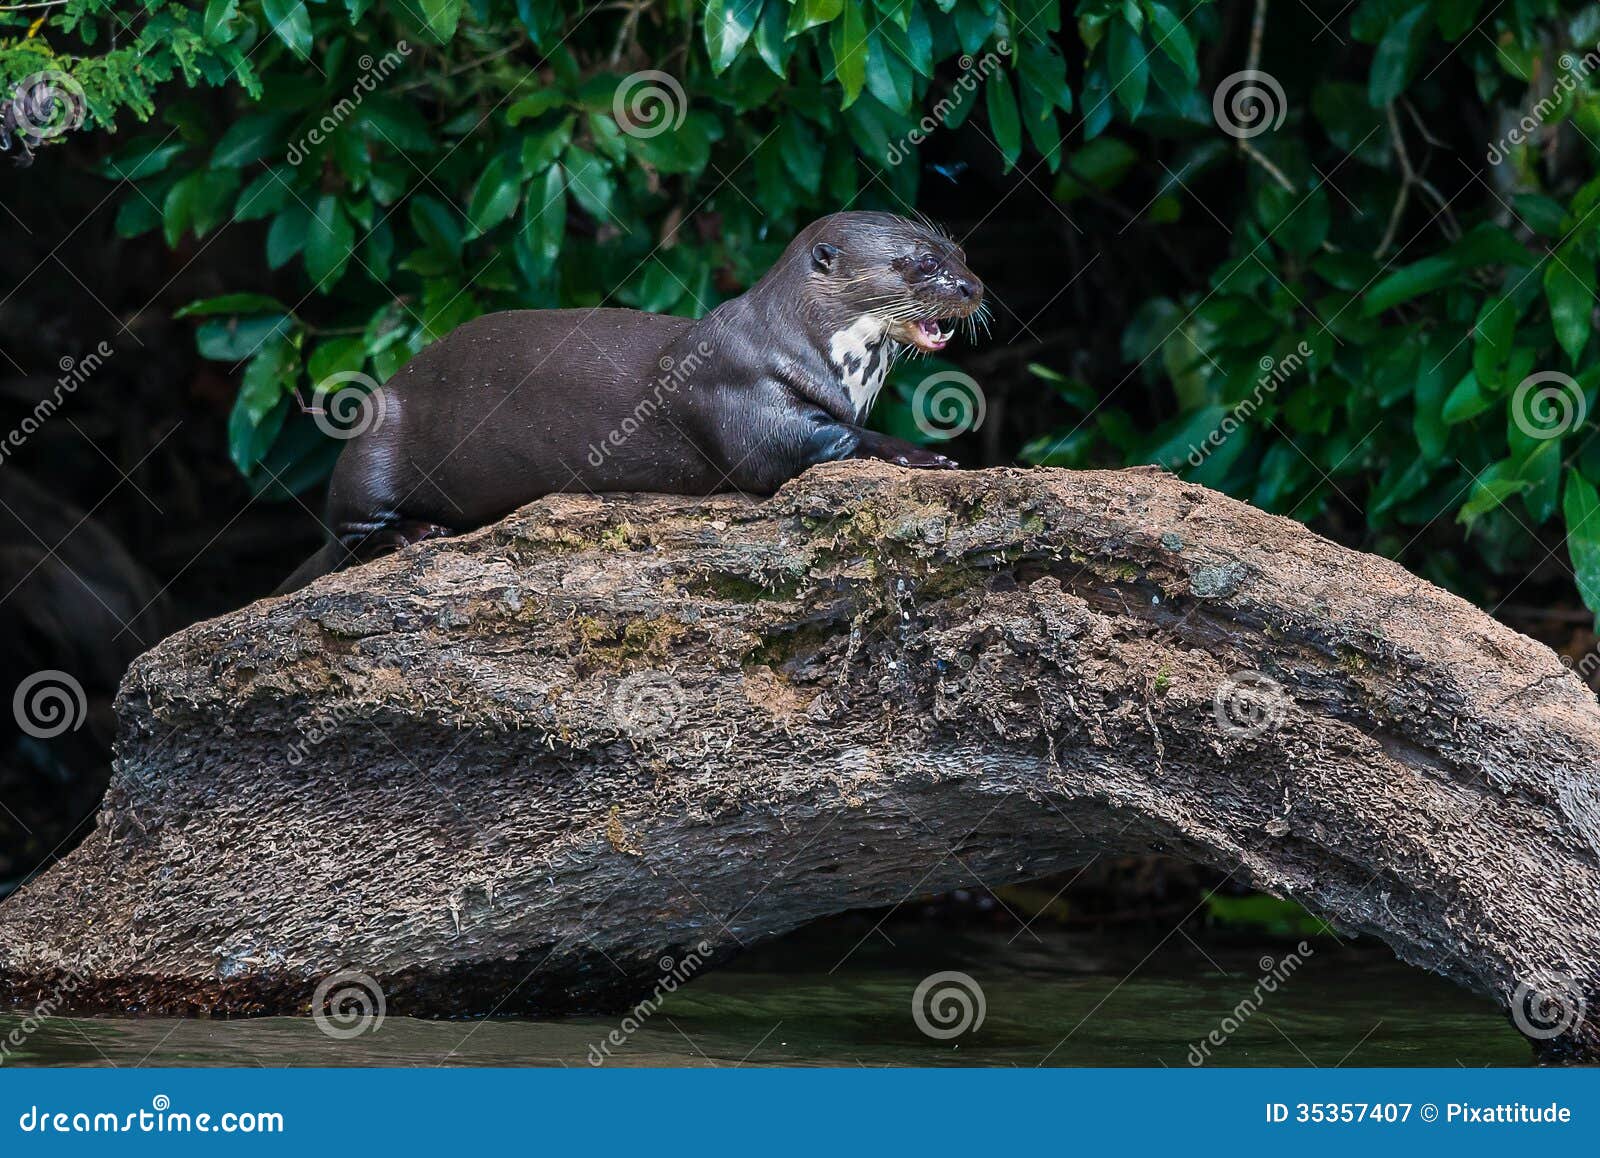 845 Otter Standing Photos Free Royalty Free Stock Photos From Dreamstime